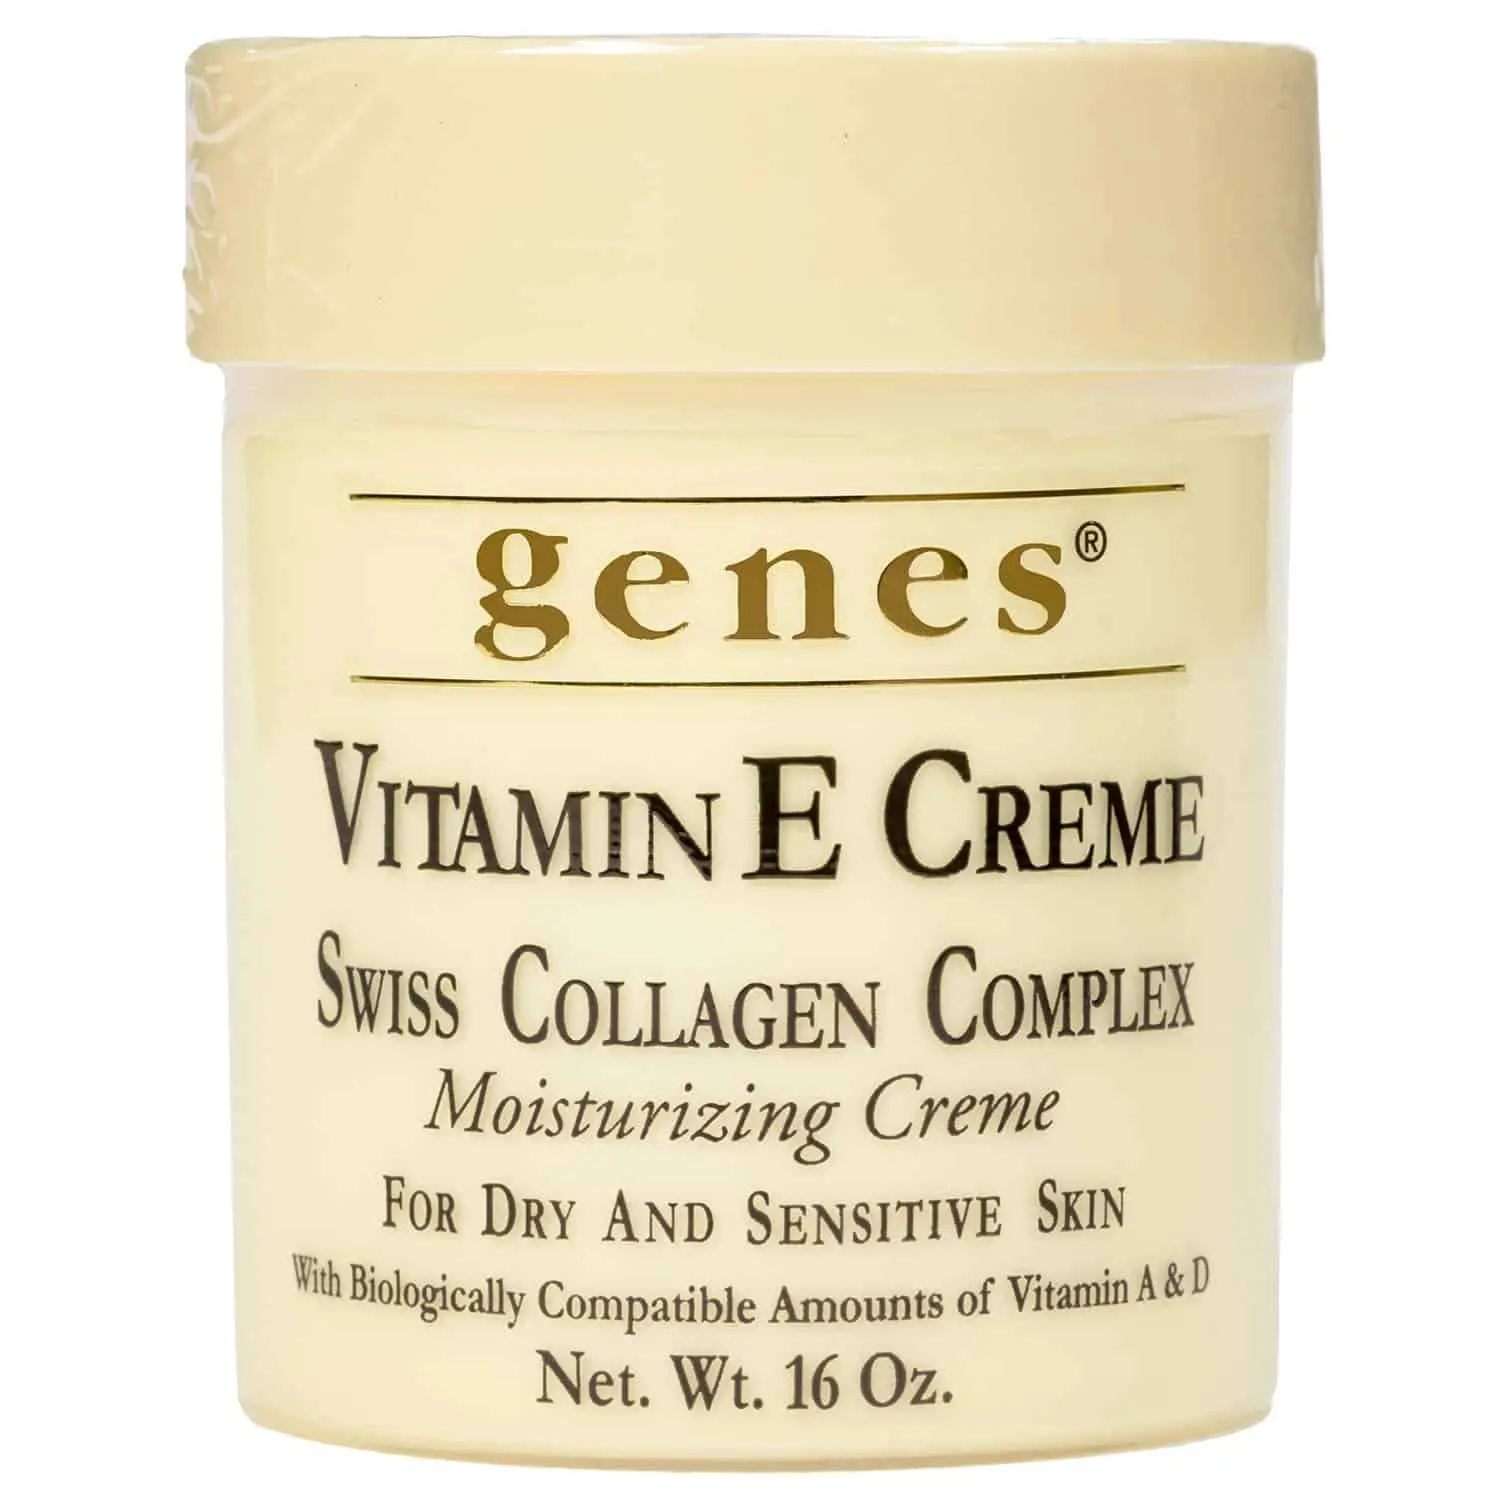 PACK of 2 Genes Vitamin E Creme (16 oz.) Swiss Collagen Complex For Dry ...